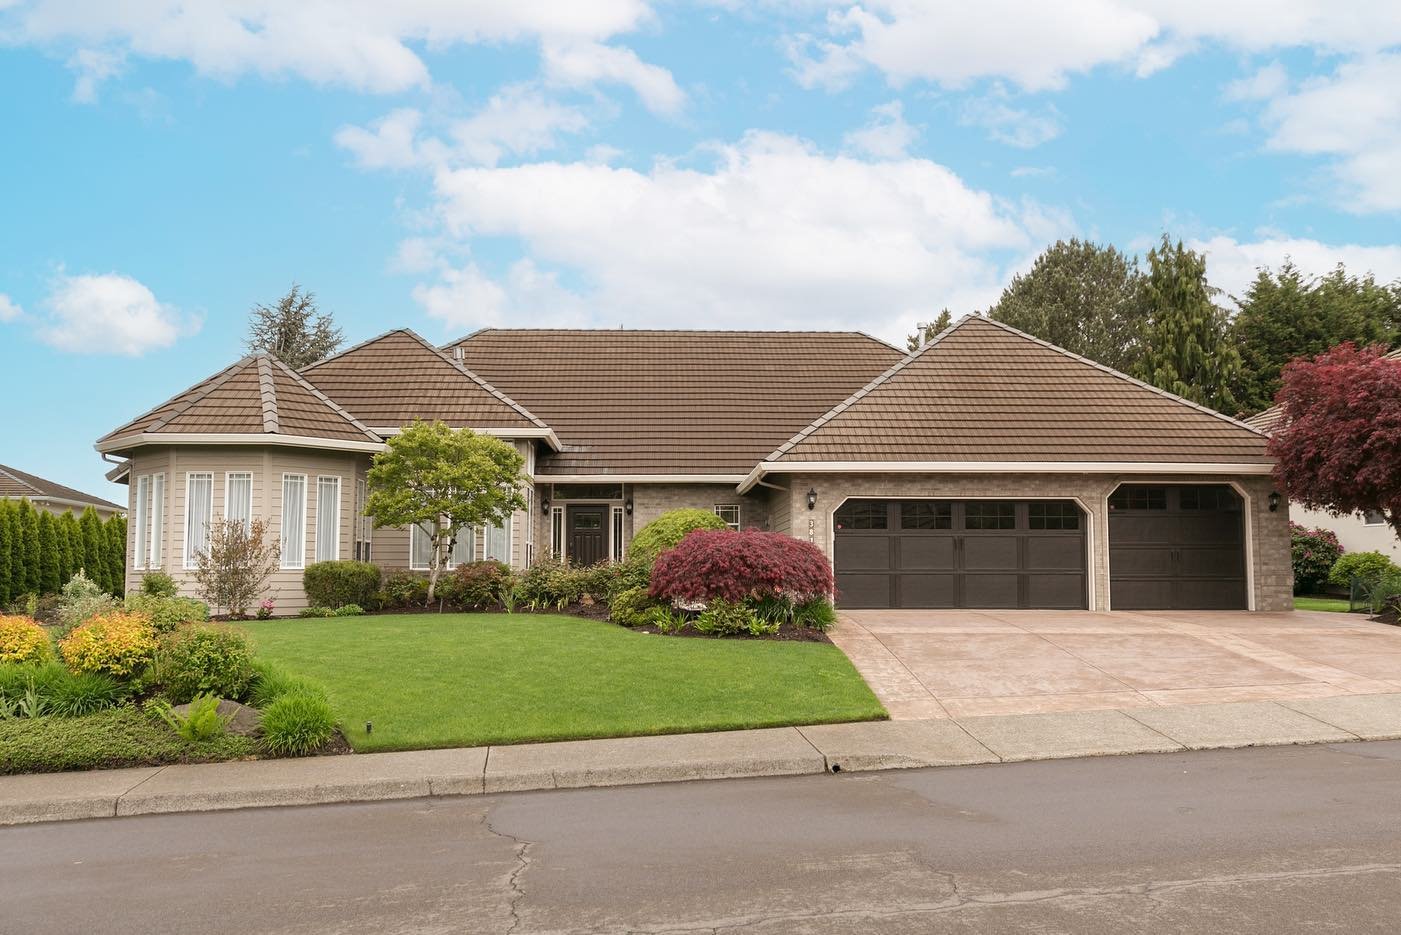 A very elegant well-maintained home in Vancouver, WA. A 3 bed/2.5 bath with separate office all located on one level. The spacious primary bathroom has lots of natural light from the large windows and skylight in the tiled shower. 

Loaded with lots 